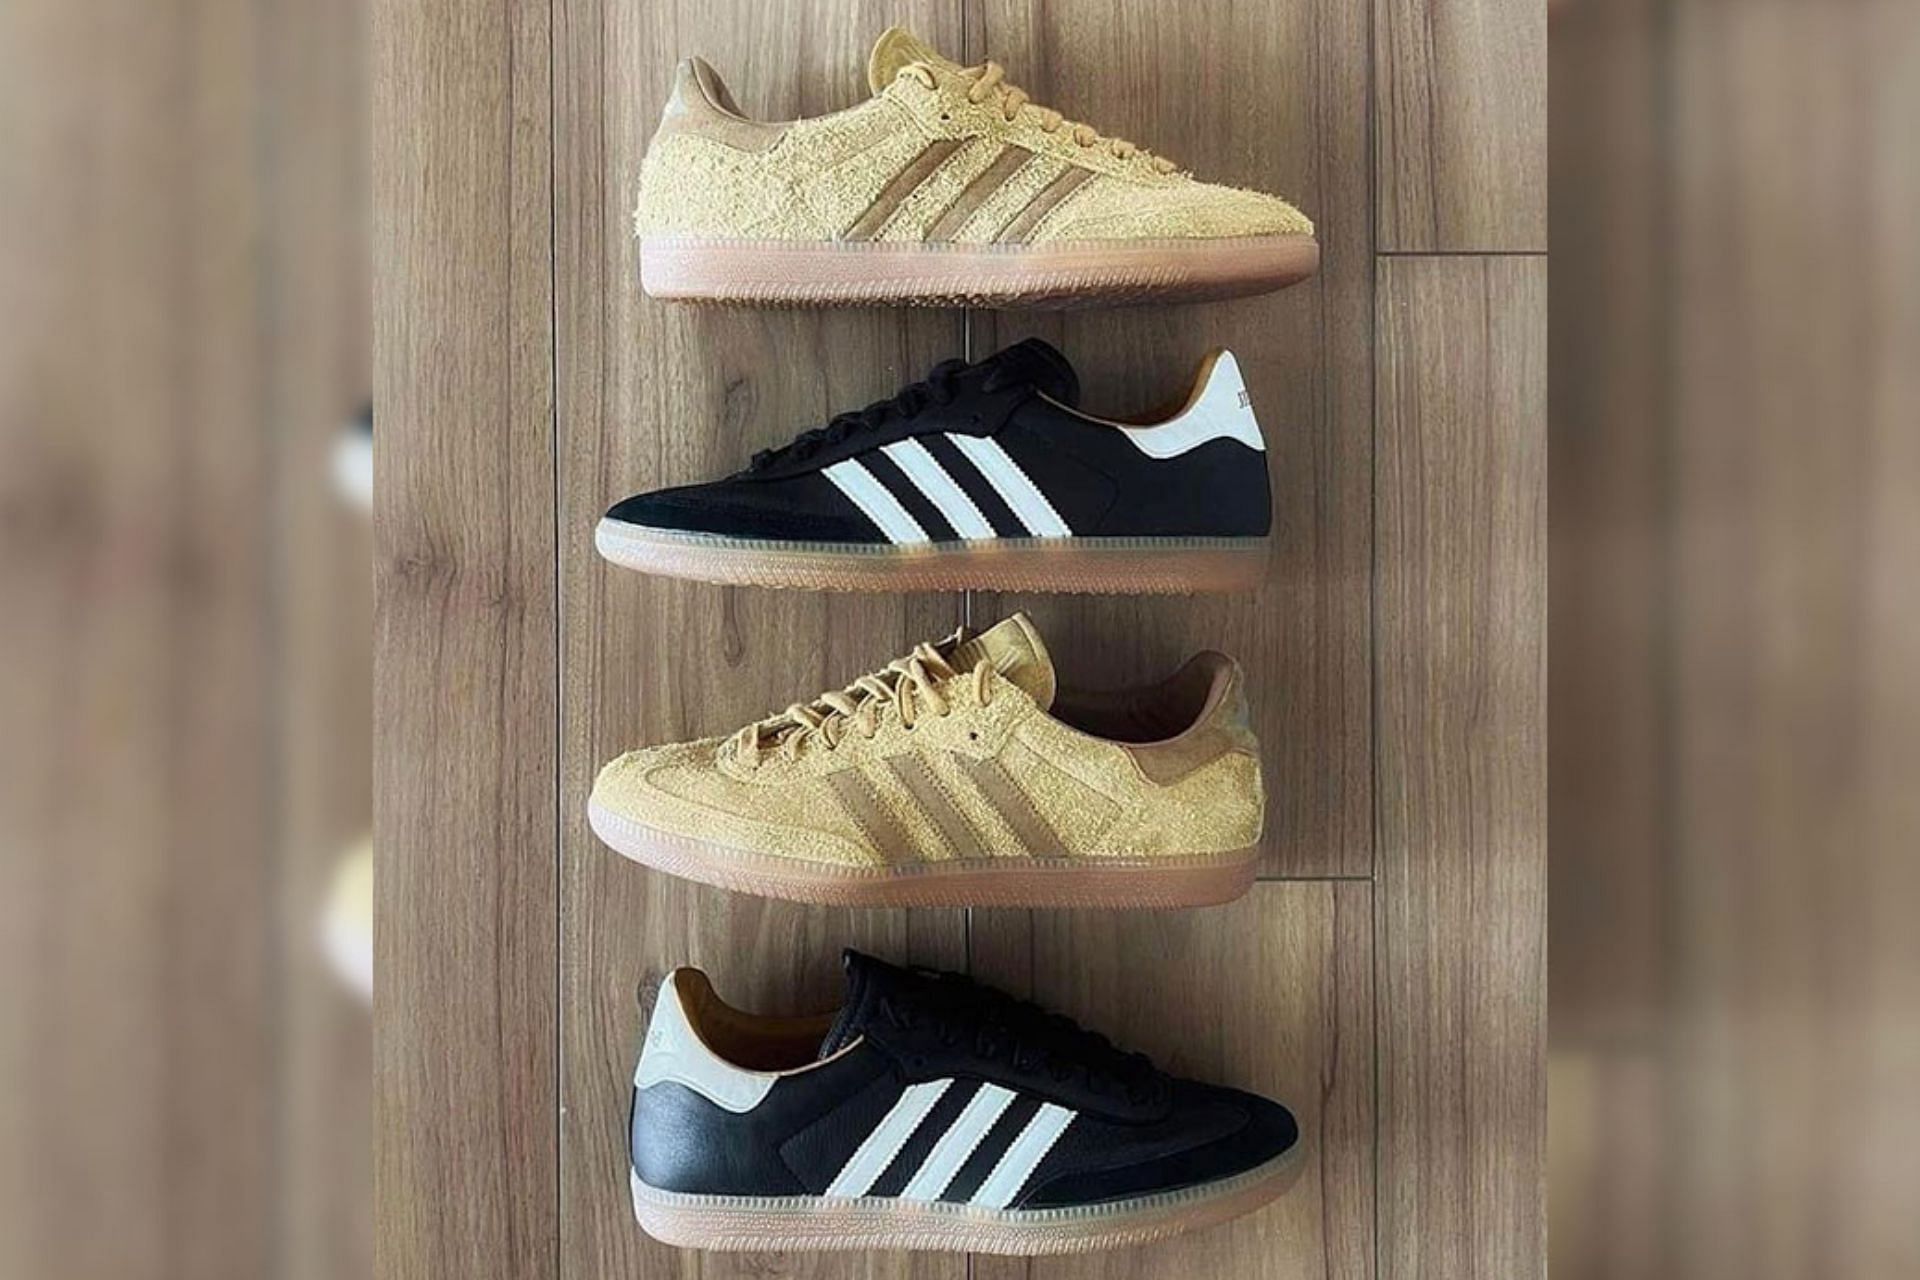 Take a closer look at the two colorways expected to be offered under the upcoming JJJJound x Adidas Samba capsule (Image via Instagram/@Thrift2.000)